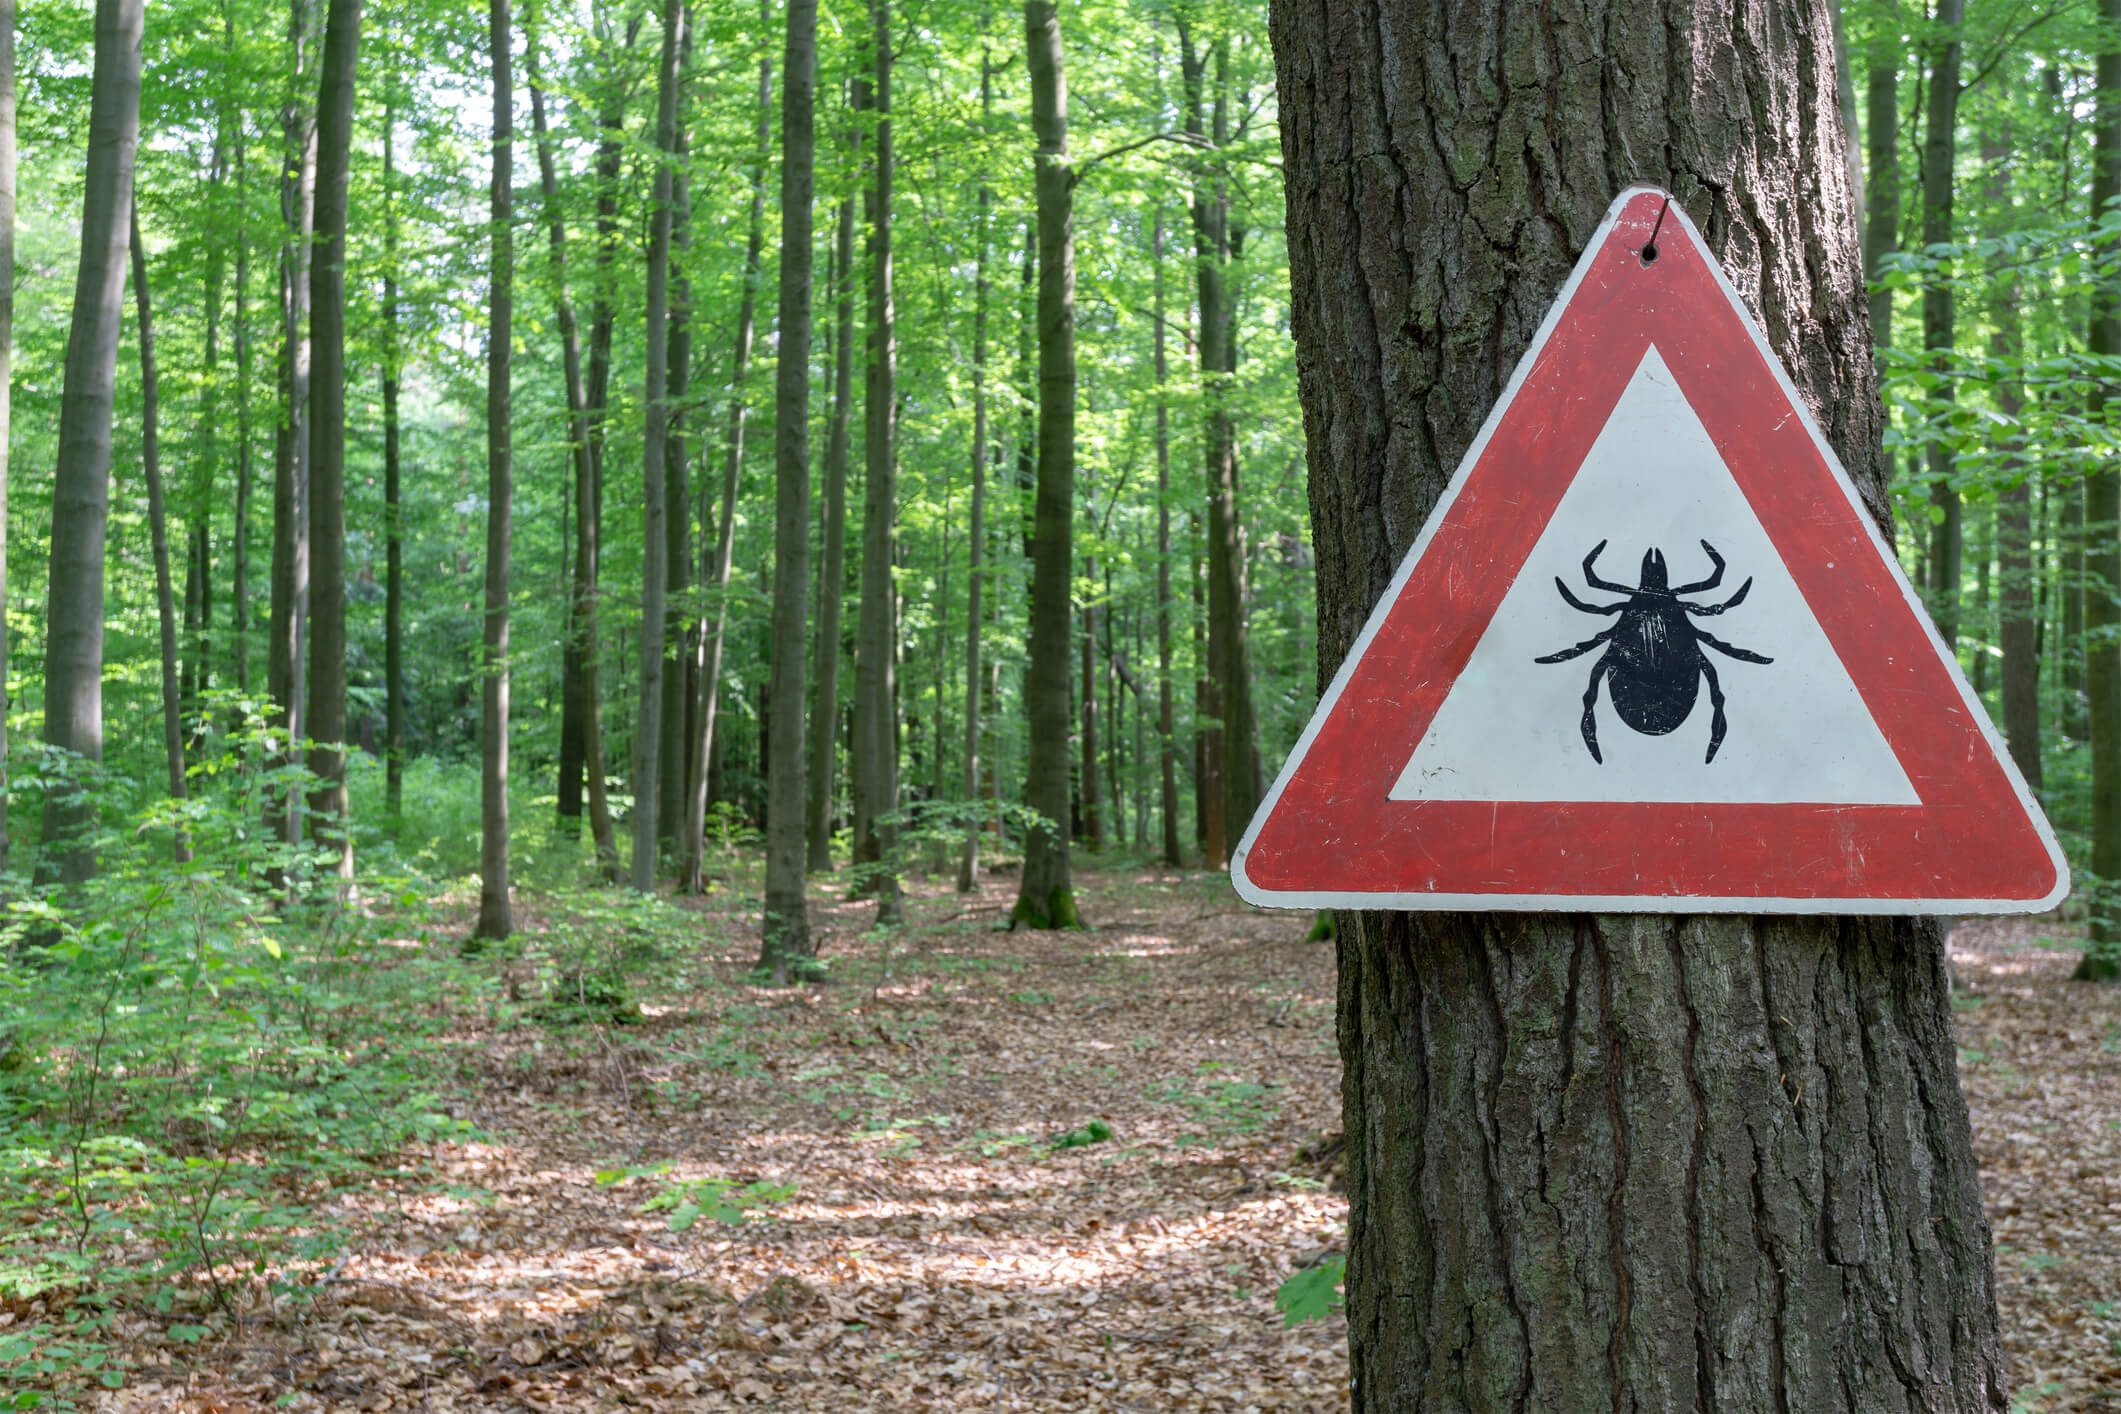 a tick signal in the woods